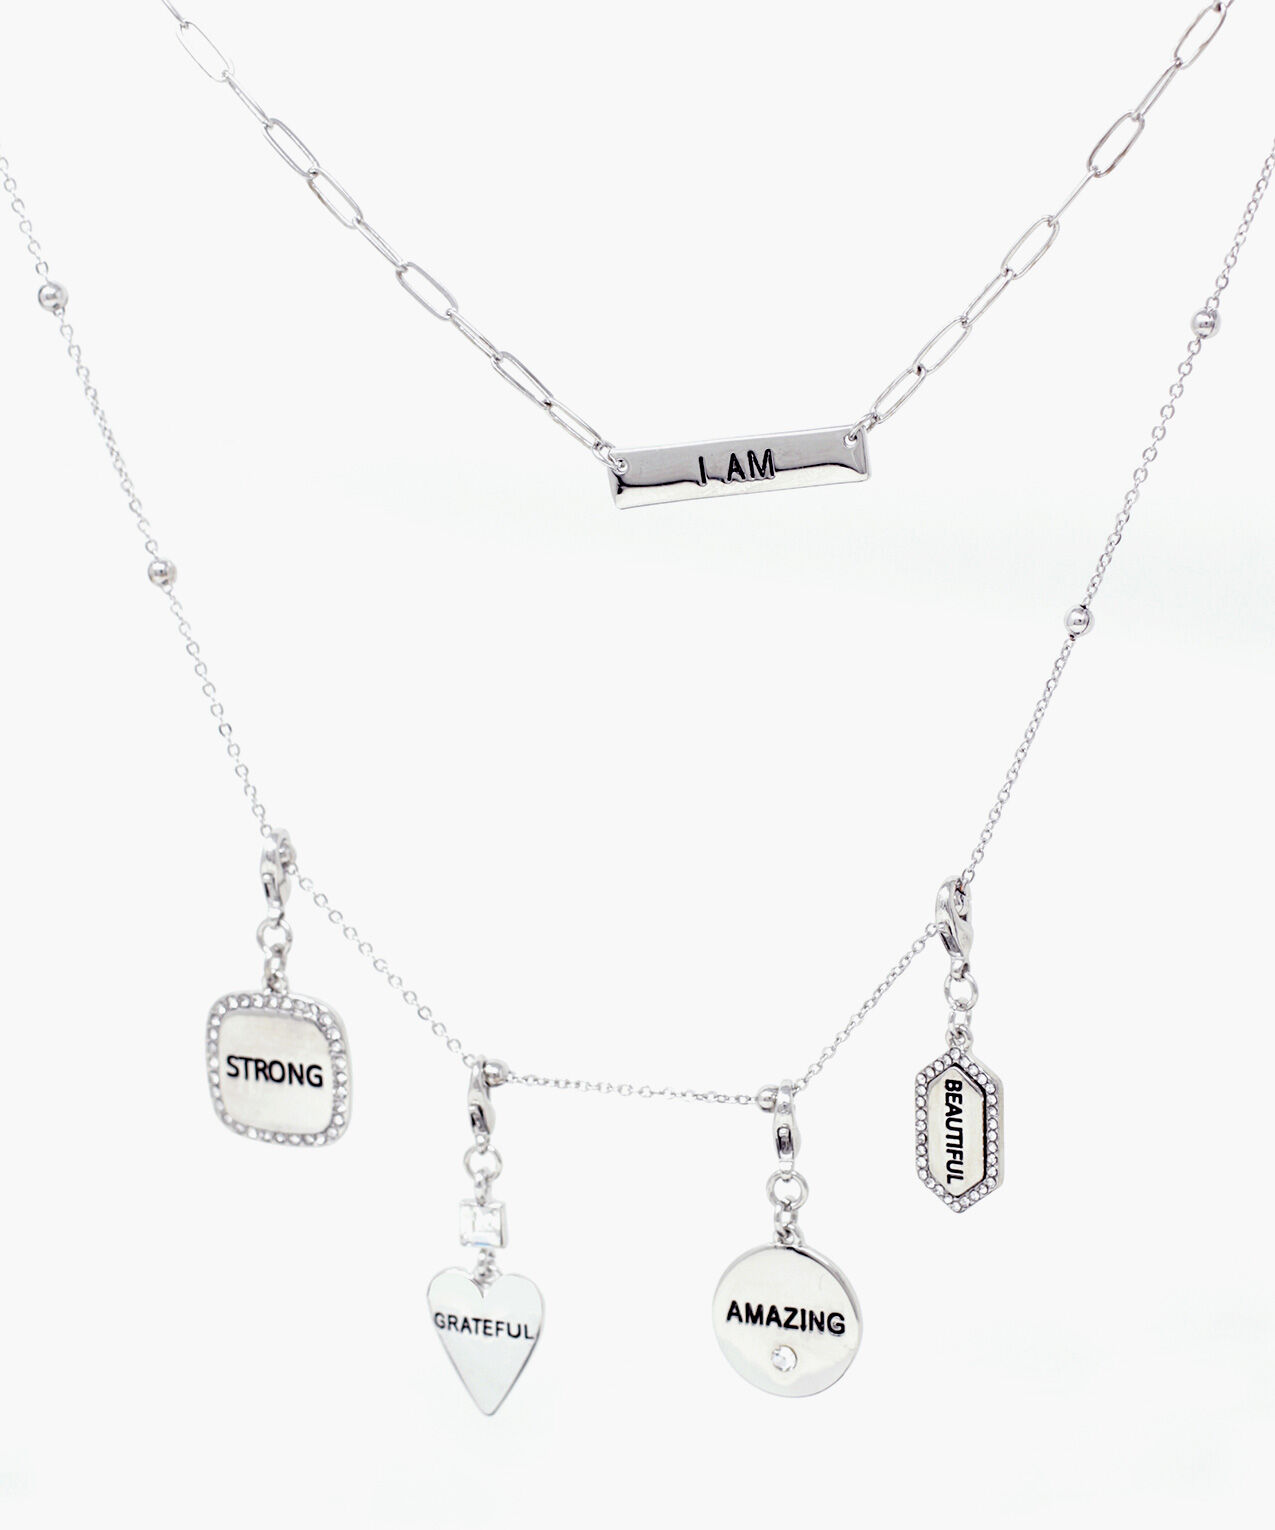 Long Silver Convertible "I Am" Necklace